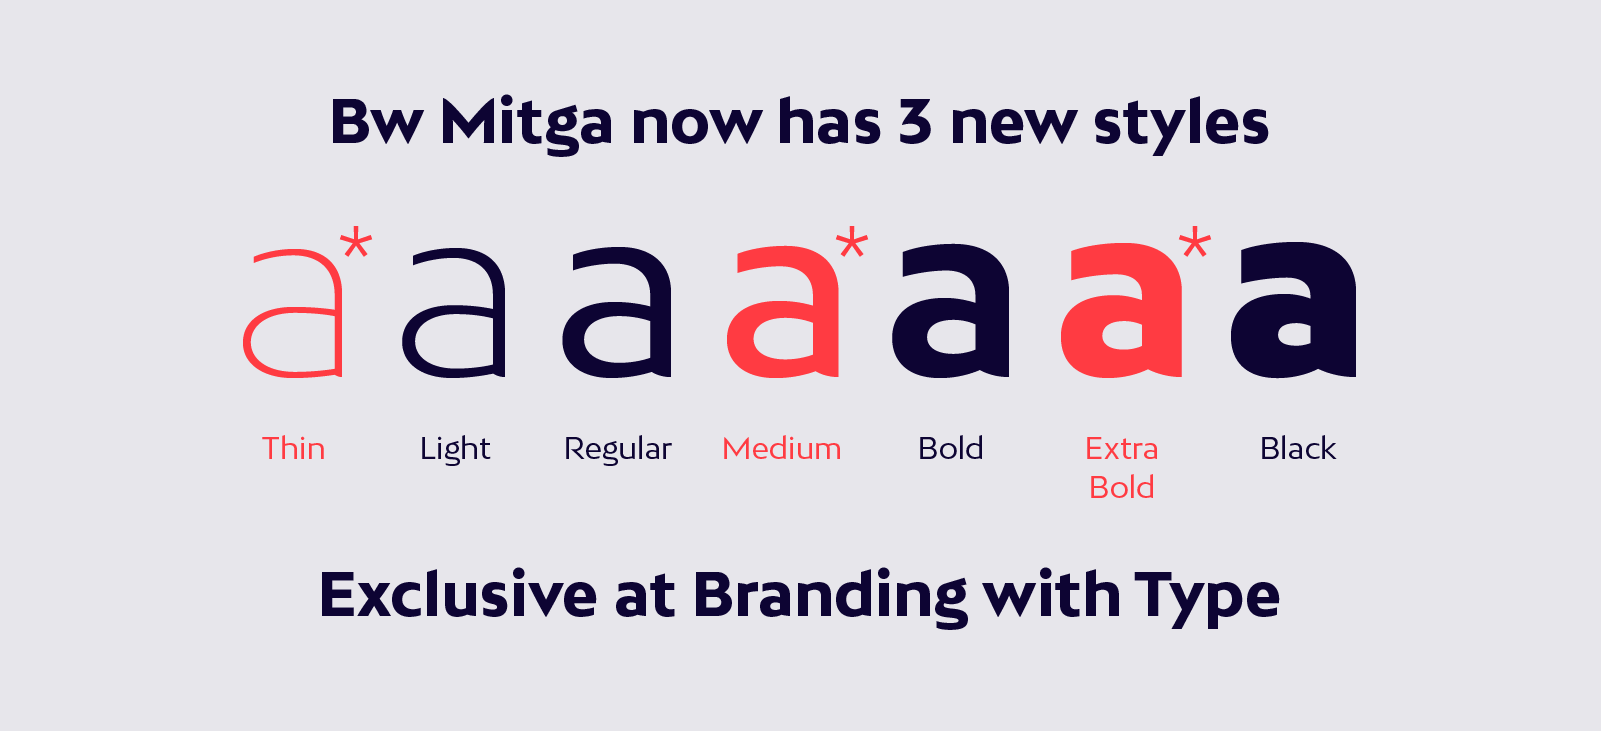 Bw Mitga font family gets new styles